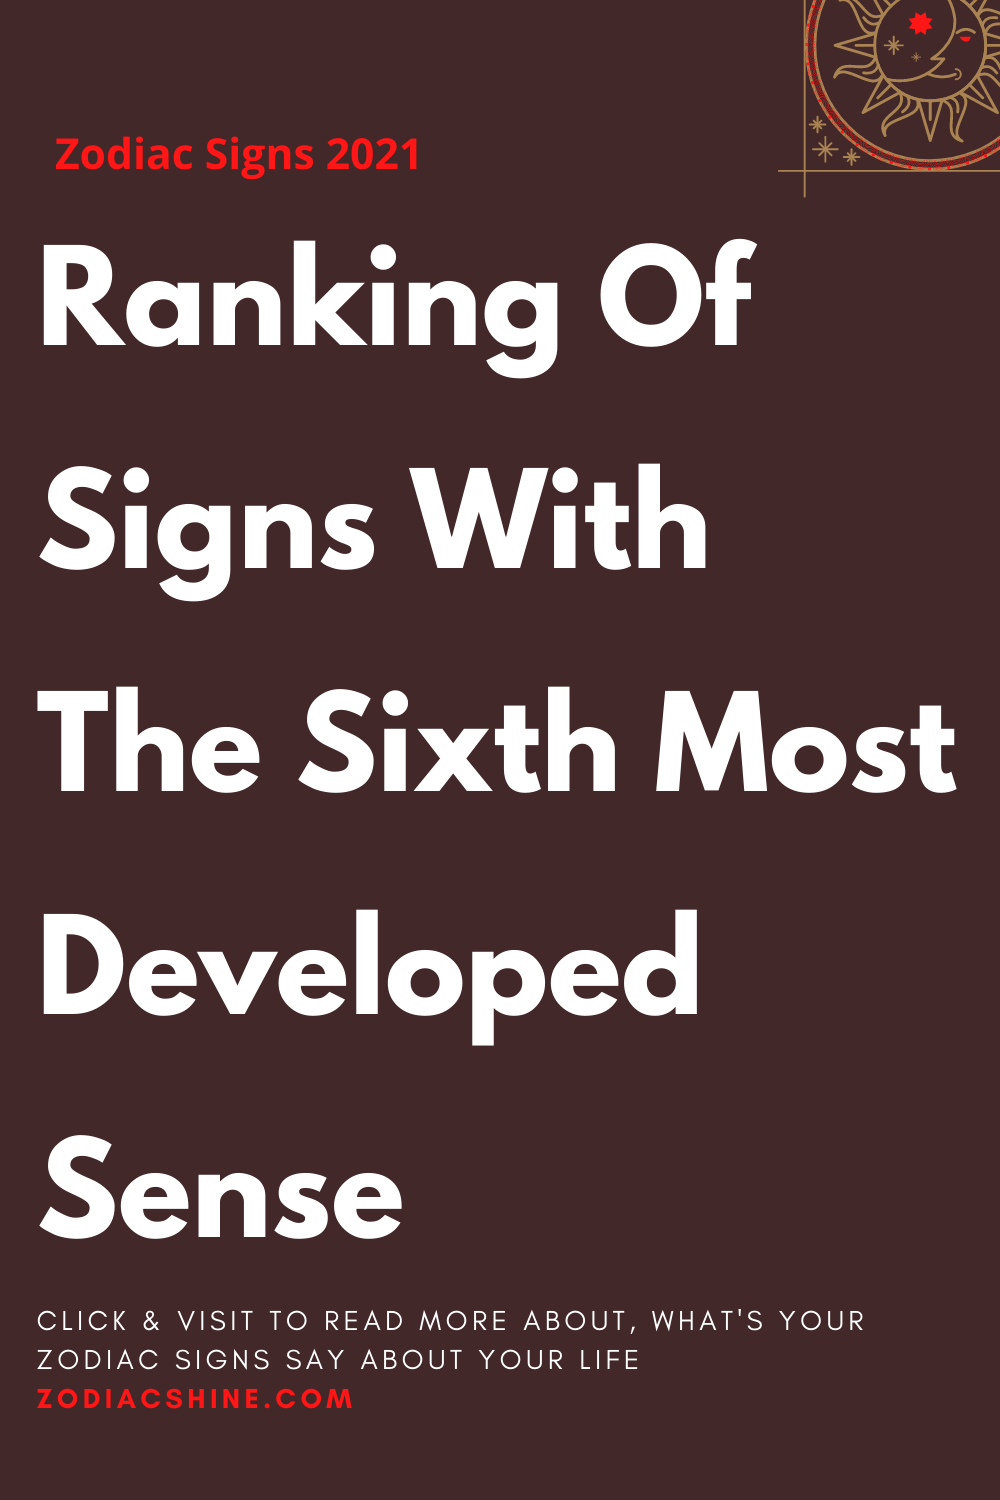 Ranking Of Signs With The Sixth Most Developed Sense